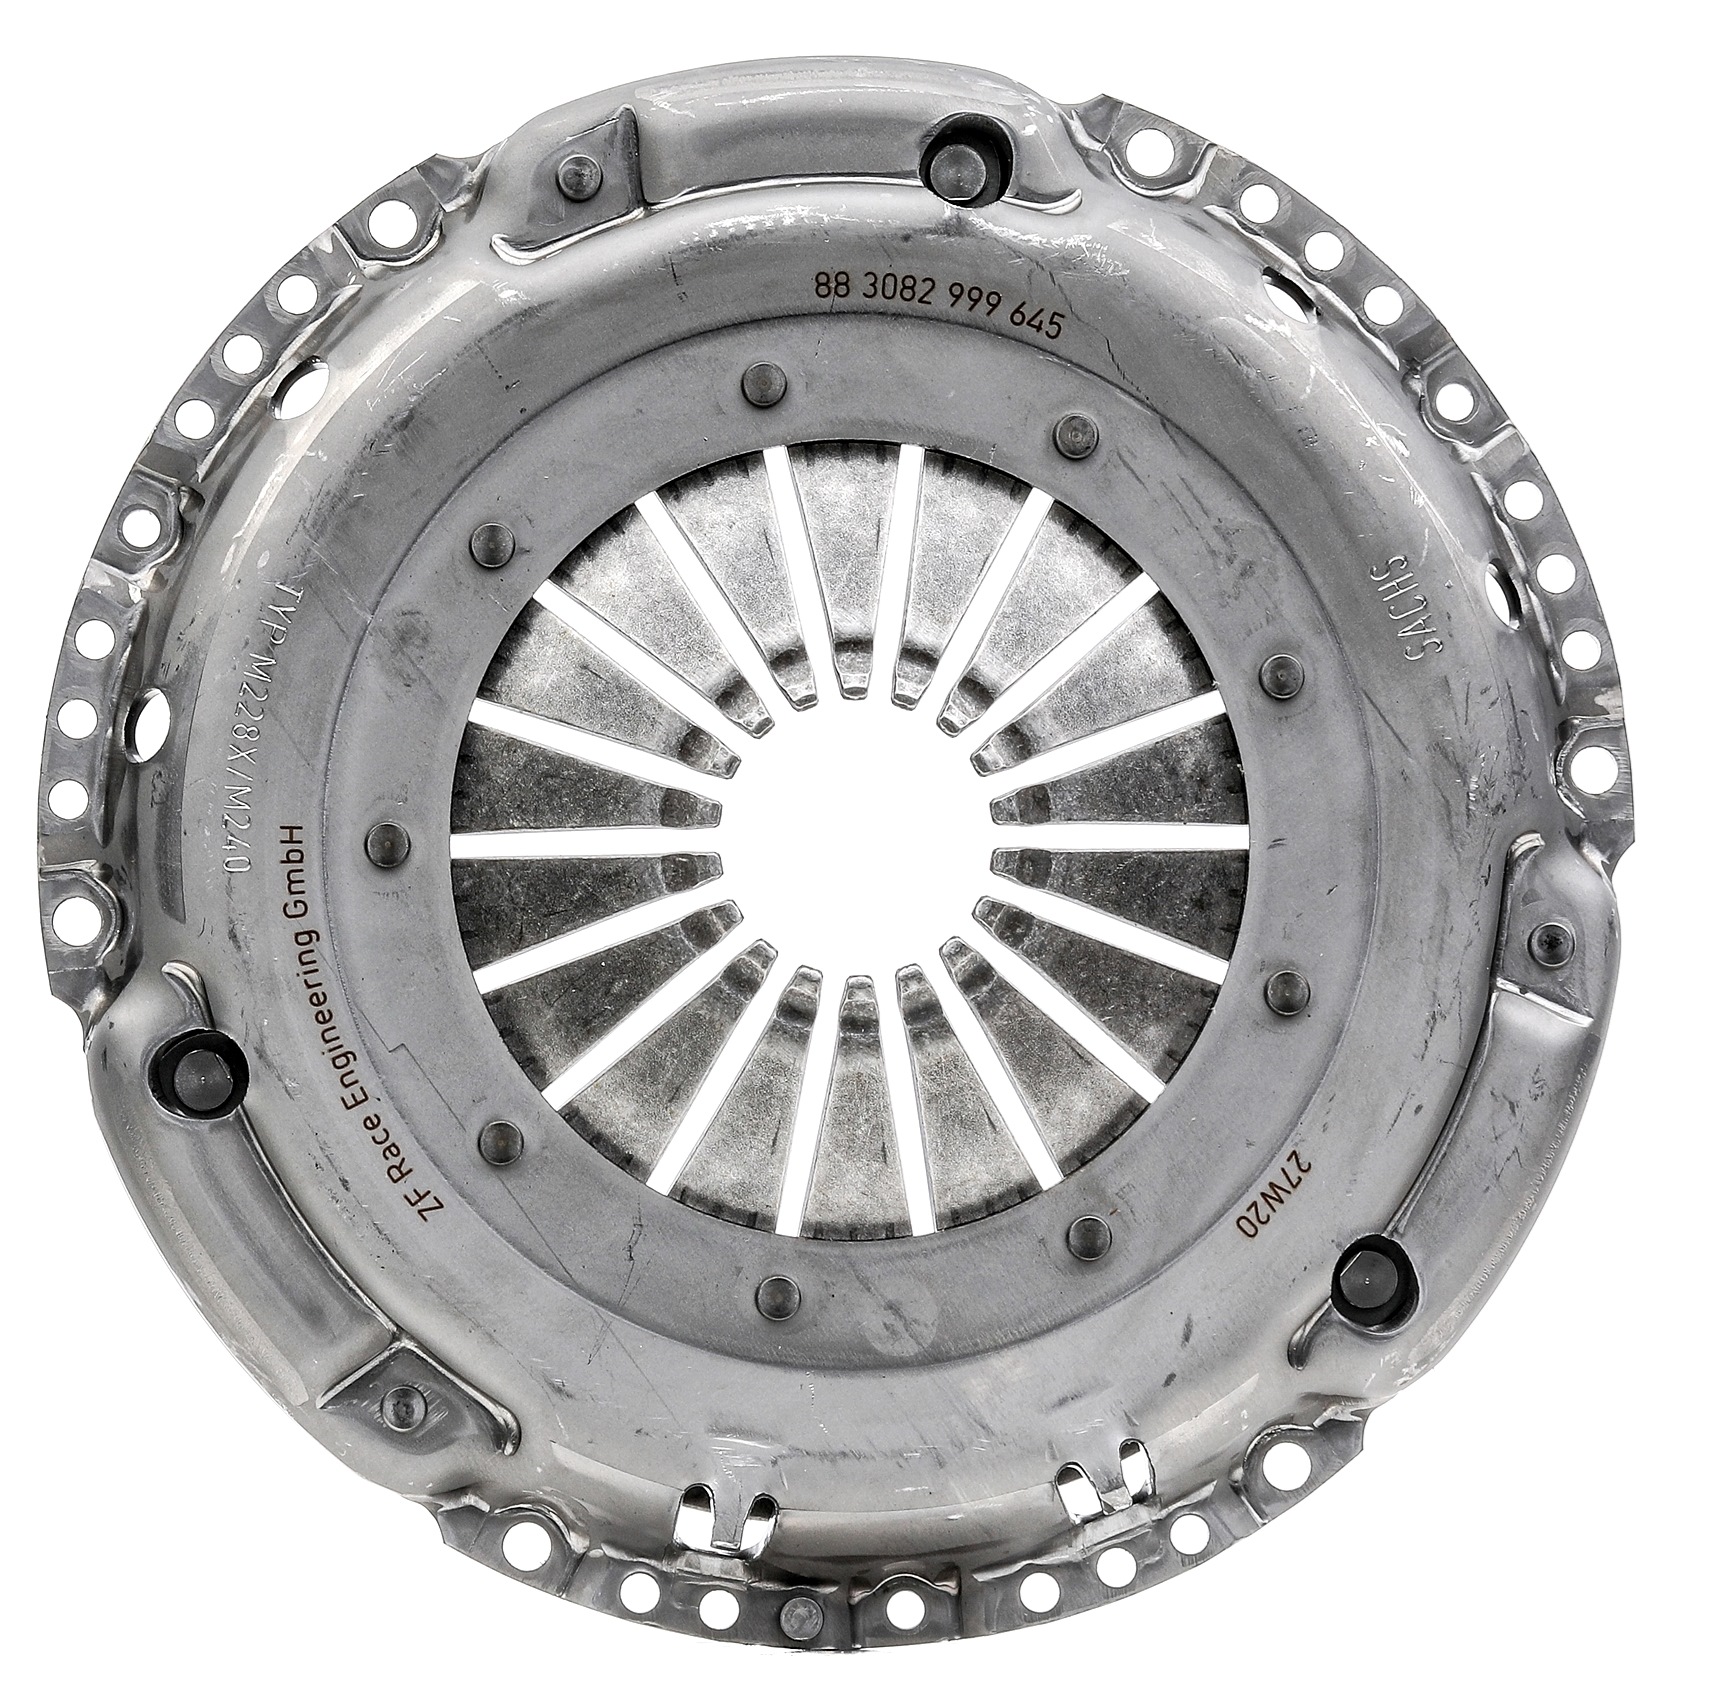 SACHS PERFORMANCE Performance 883082 999645 Clutch cover plate